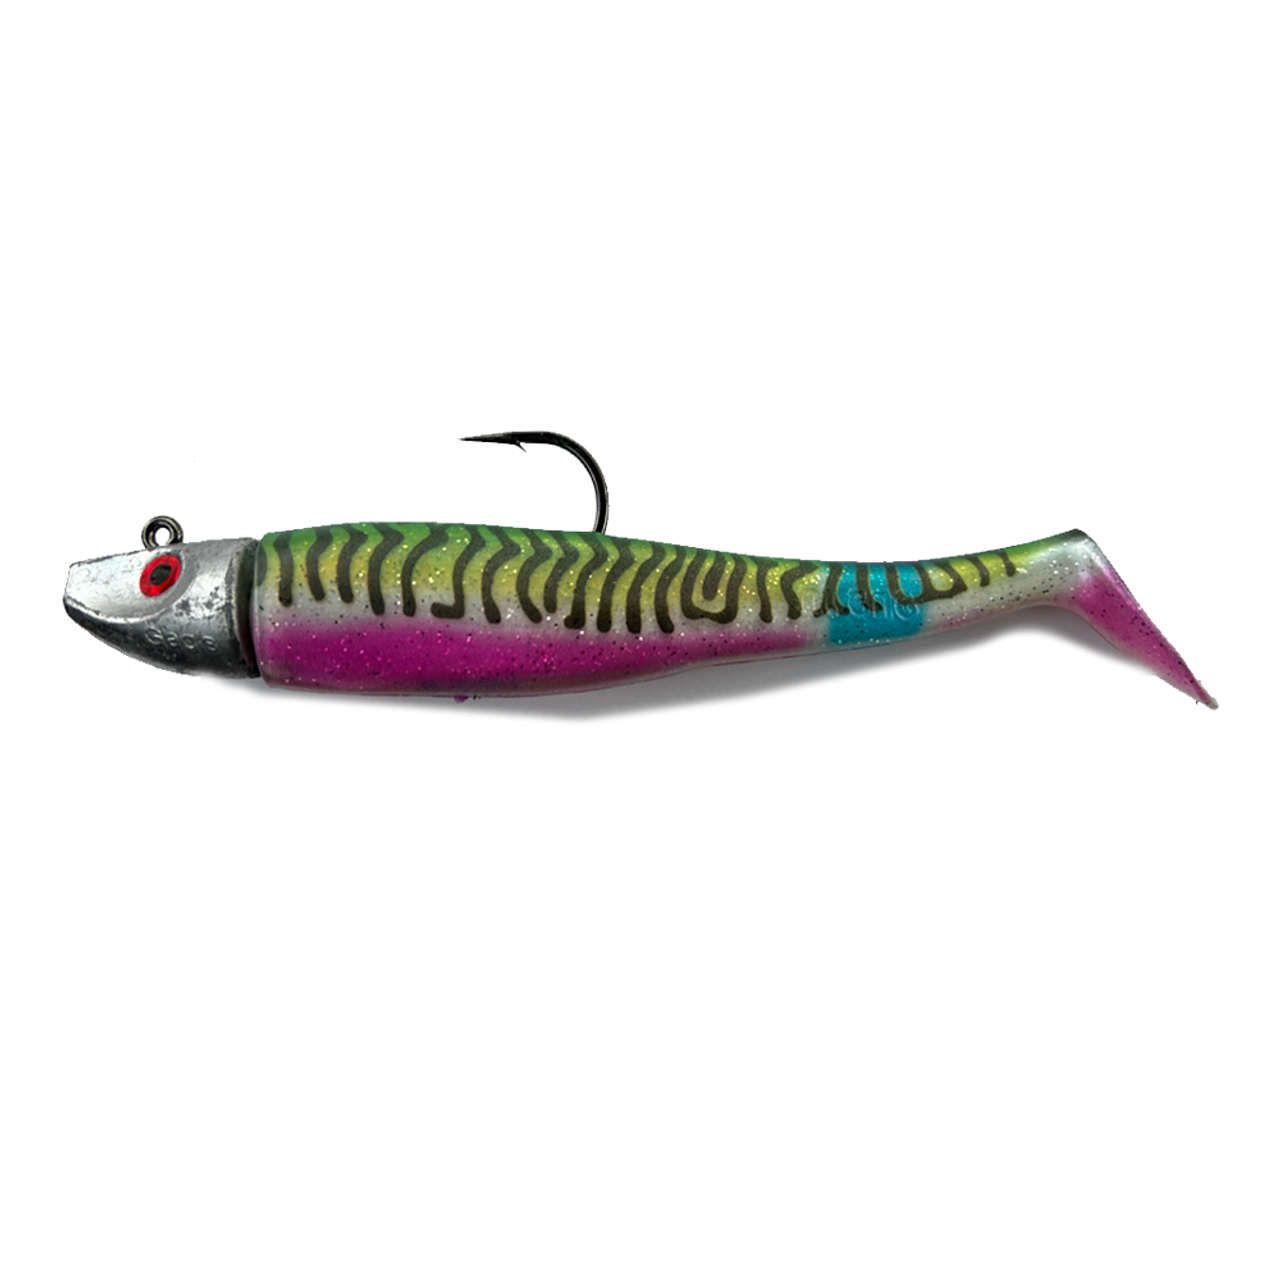 Al Gags Whip It Fish Tail Bunker 5 3 Tails Palestine